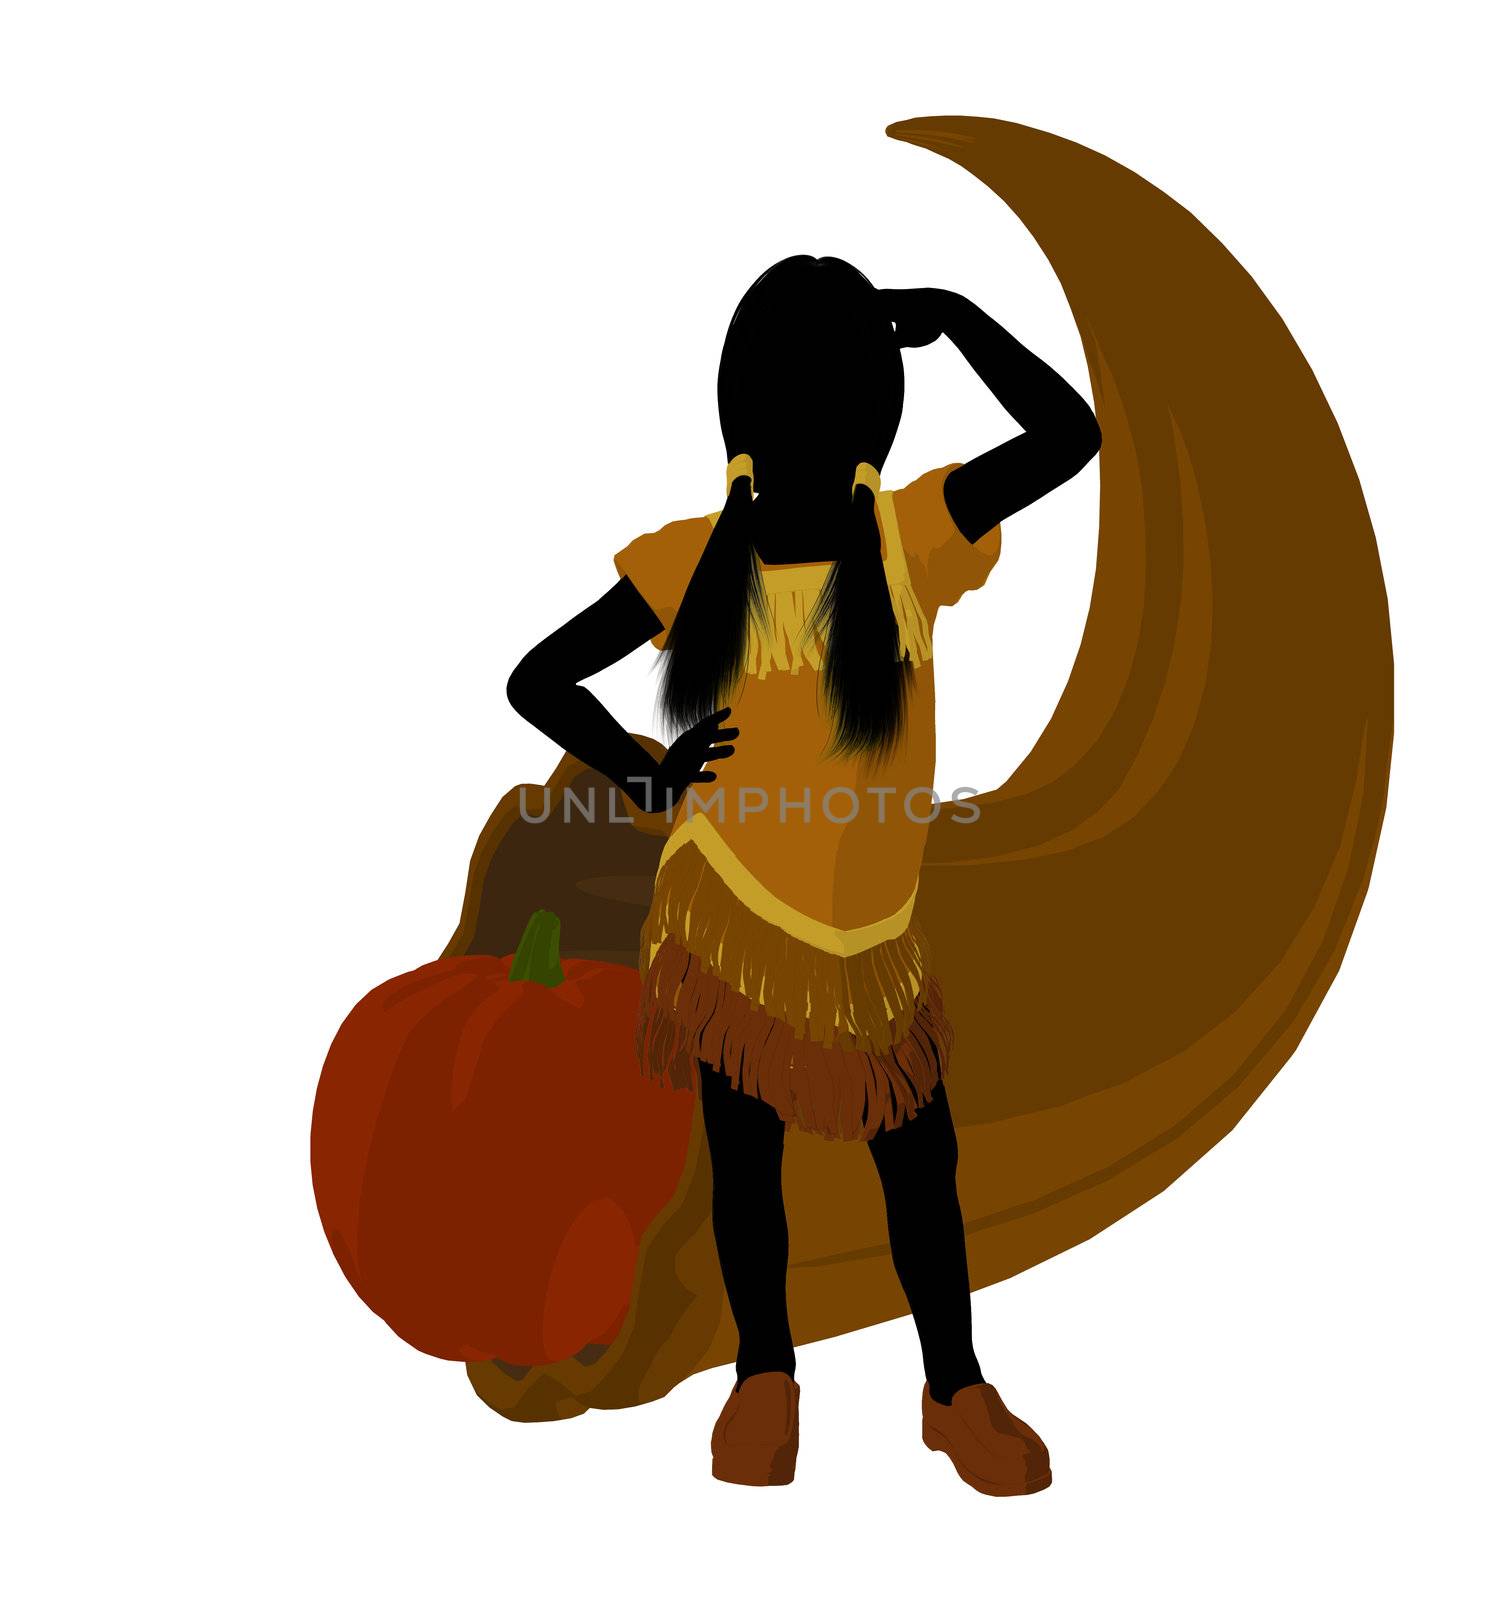 American indian with a cornocopia silhouette on a white background